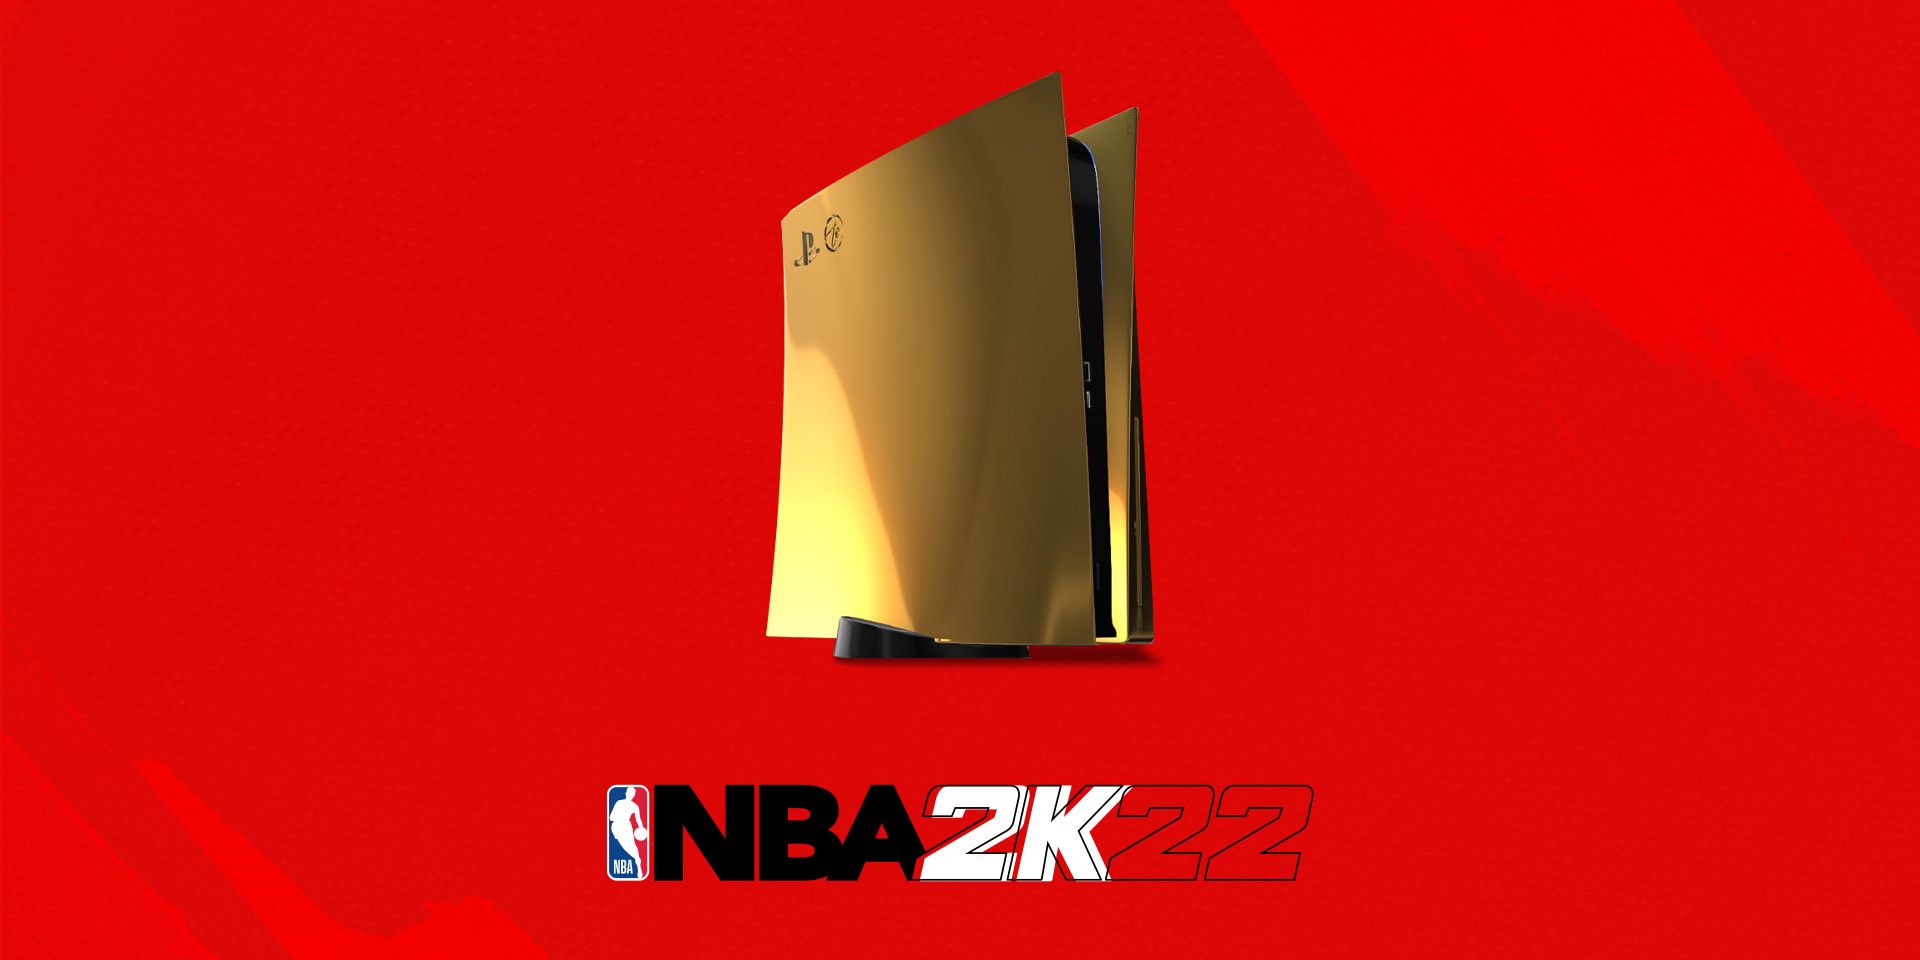 NBA 2K Gave Away A 24K Gold PS5 With A Retail Value Over $10K